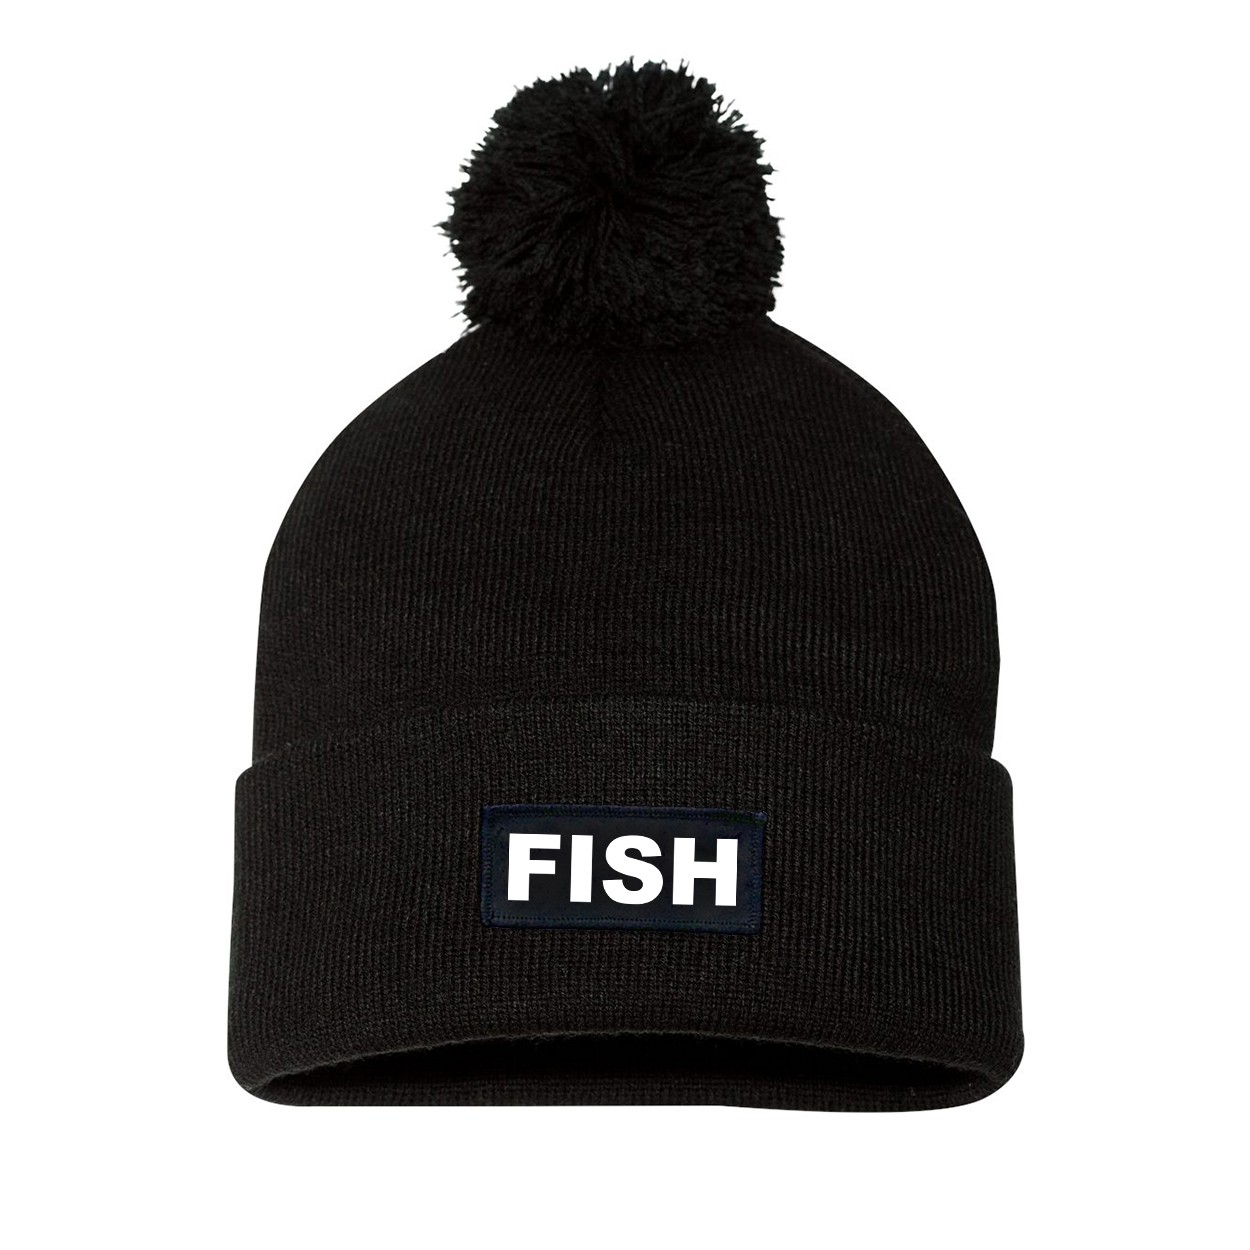 Fish Brand Logo Night Out Woven Patch Roll Up Pom Knit Beanie Black (White Logo)